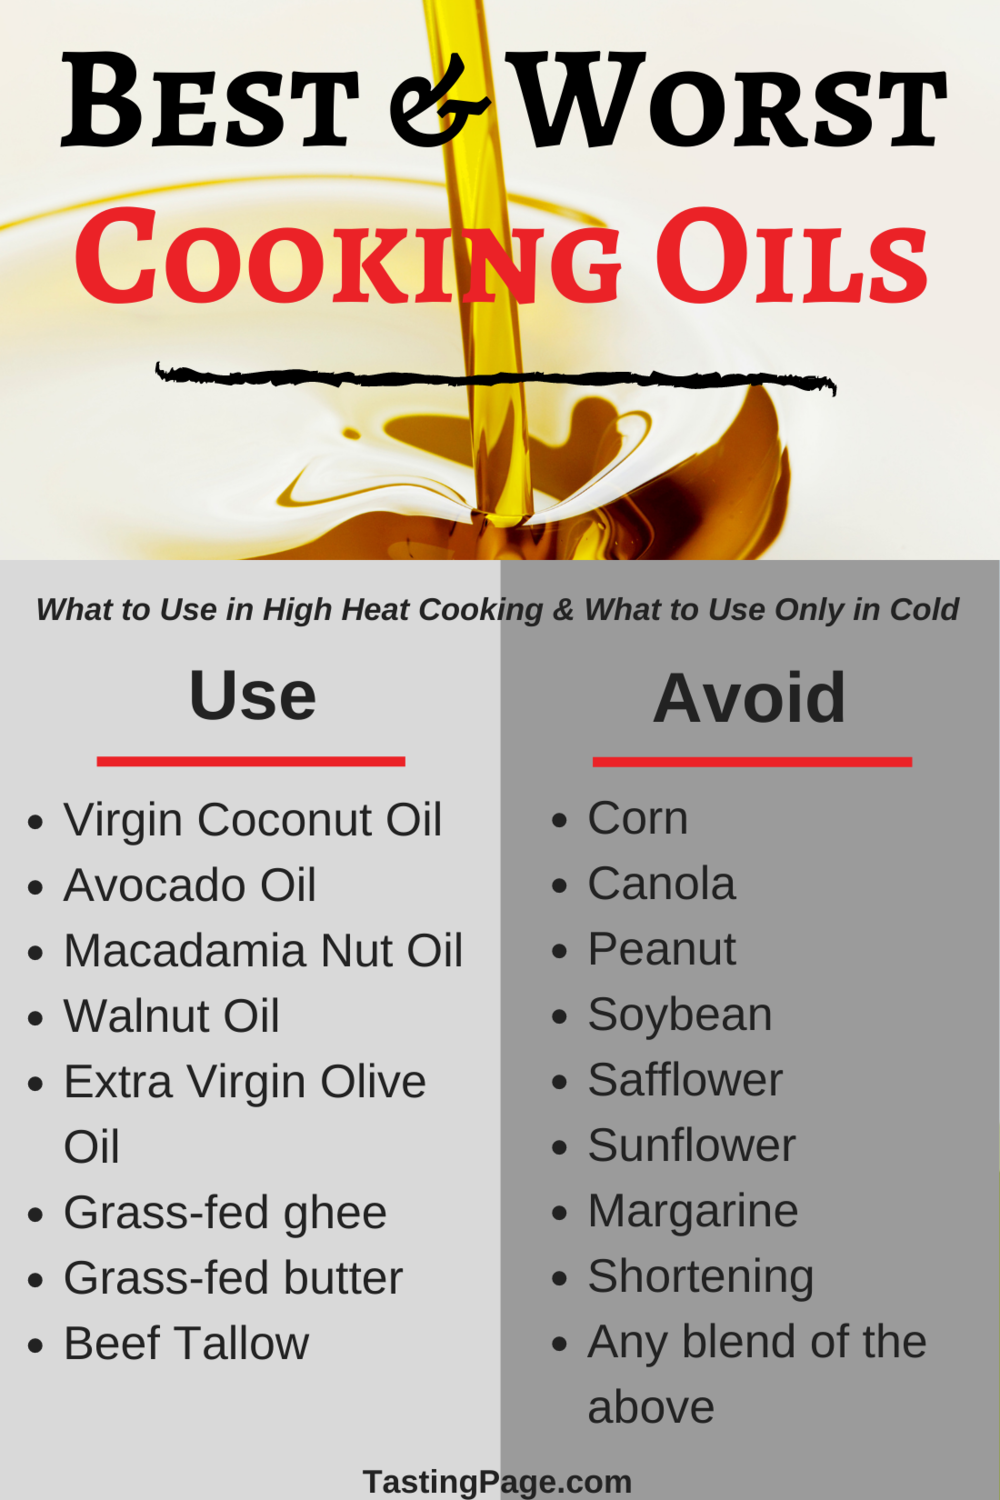 What are the Best Cooking Oils?